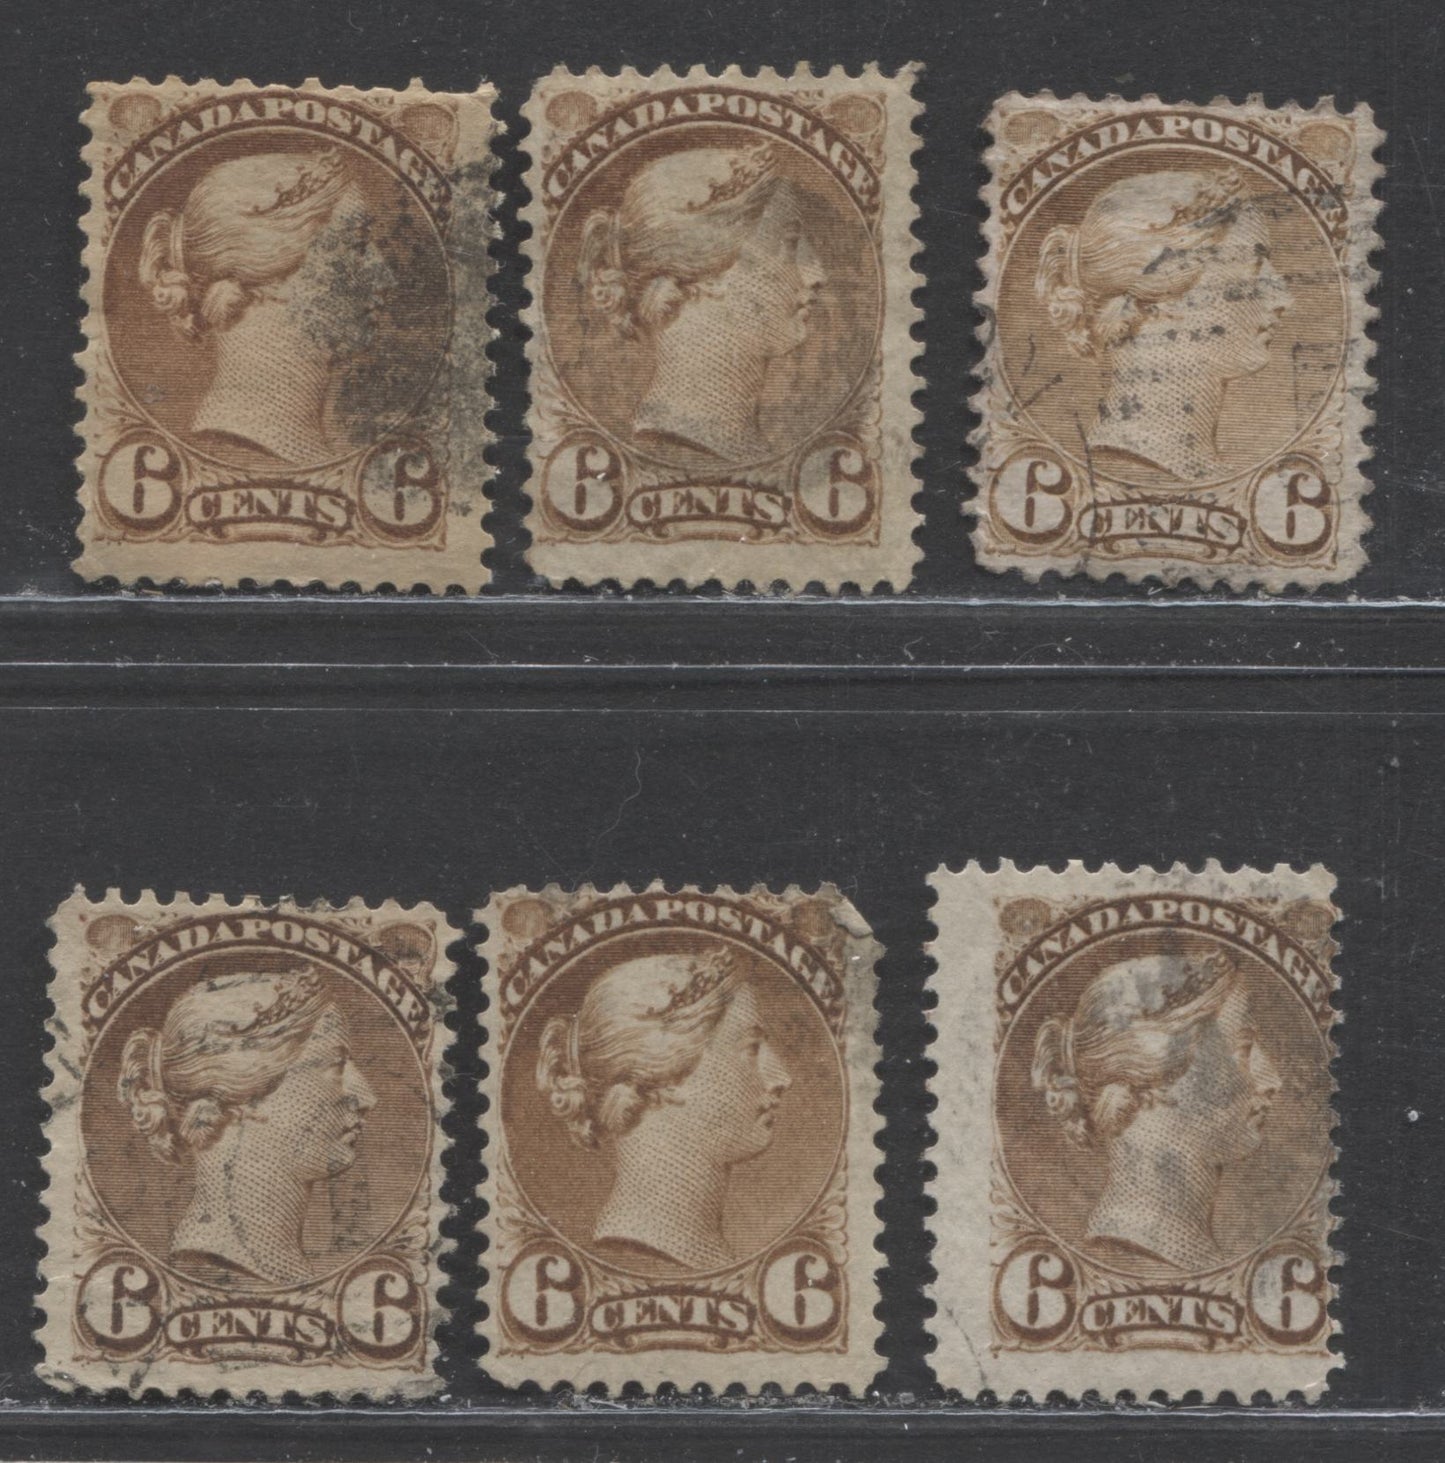 Lot 153 Canada #39, 39d 6c Brown and Yellow Brown Queen Victoria, 1870-1897 Small Queen Issue, Six VG and Fine Used Examples Montreal, 12 x 12.1, 12.1 x 12.2, 12, Soft and Stout Horizointal Wove, Vertical Wove, Different Papers, Shades and Perfs